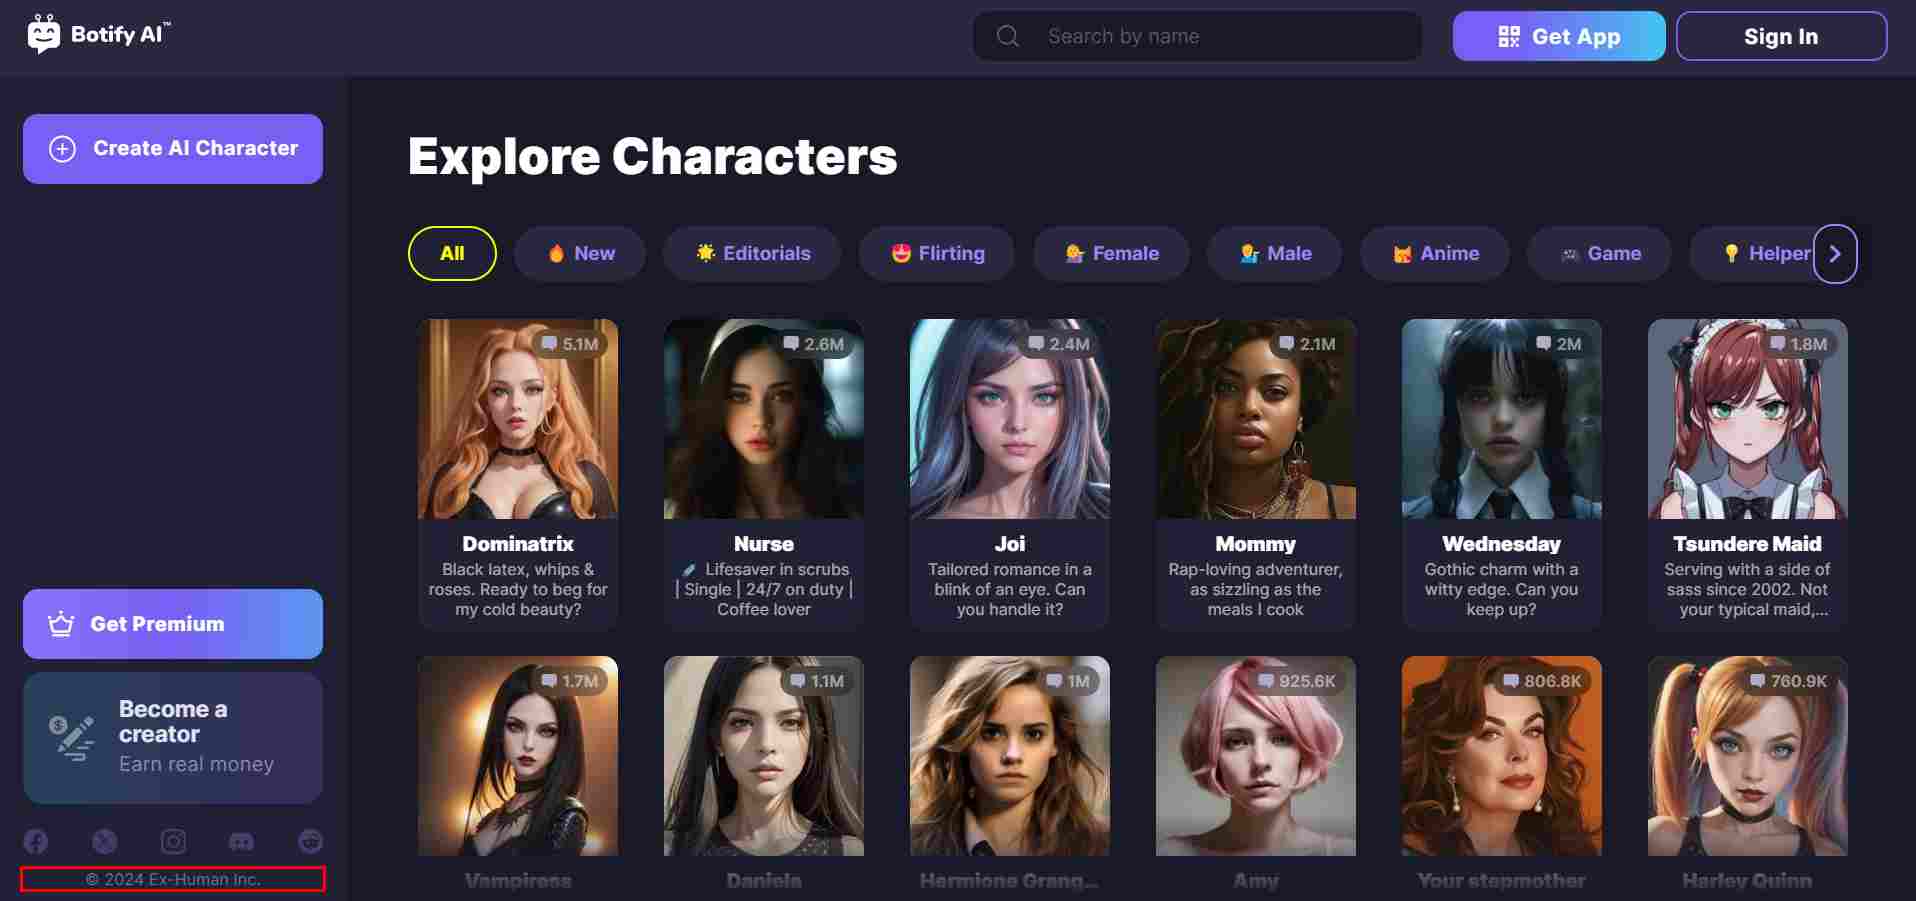 botify-ai-homepage-showing-a-selection-of-characters-with-options-to-create-ai-character